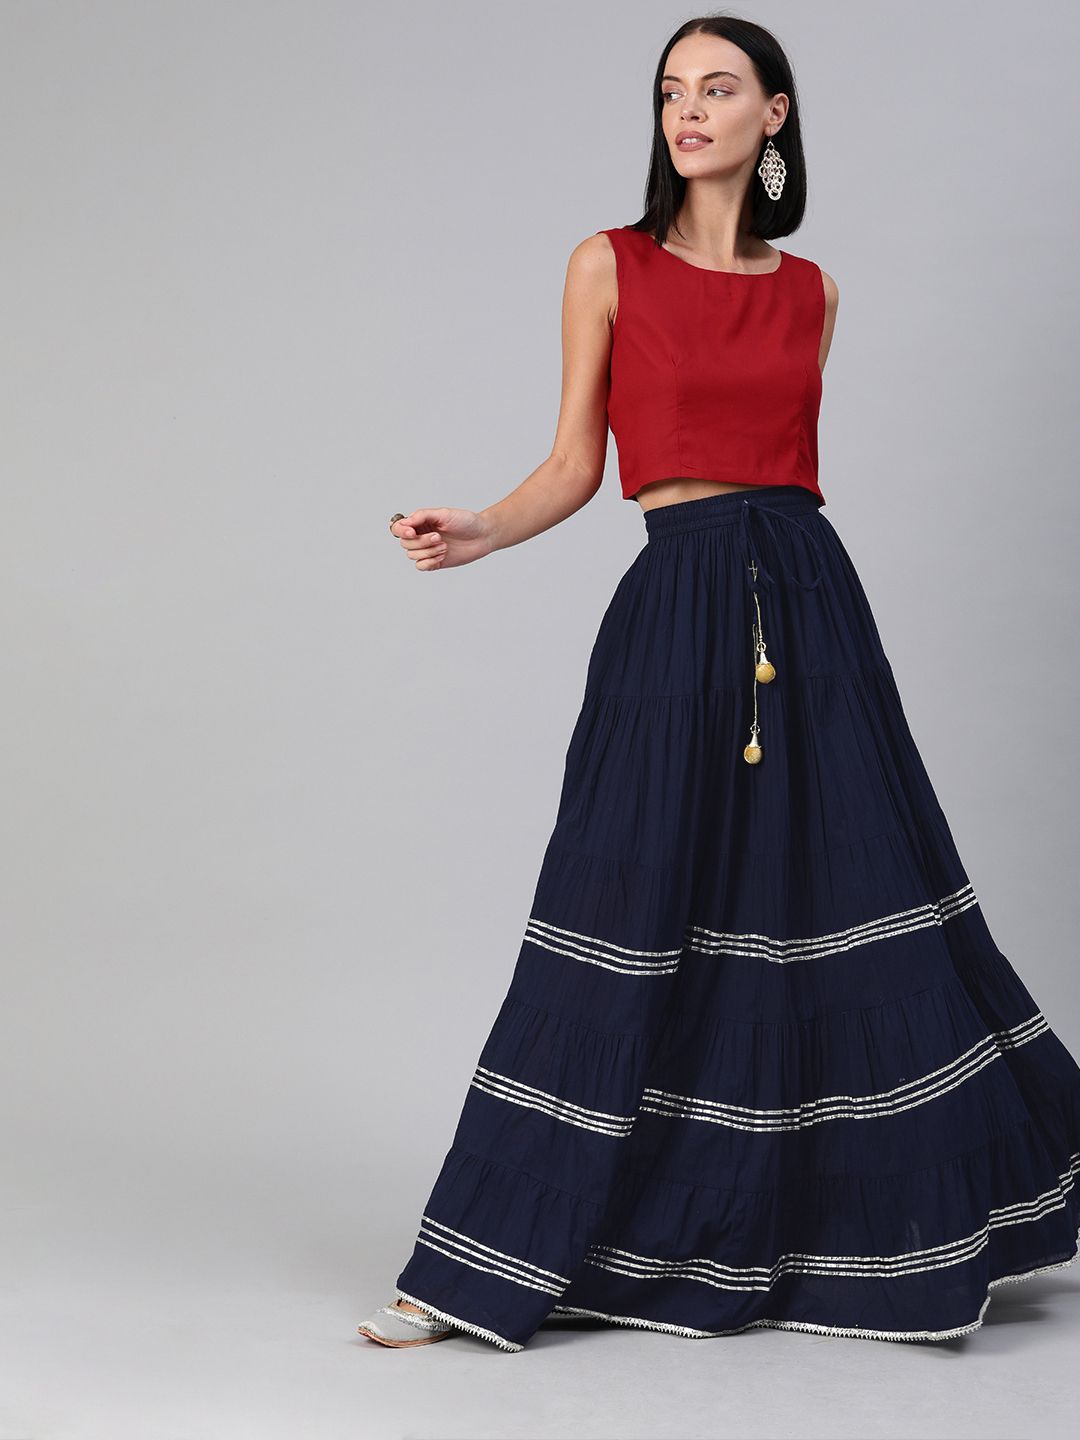 Geroo Jaipur Handcrafted Maroon Crop Sustainable Top & Navy Blue Pure Cotton Skirt Price in India